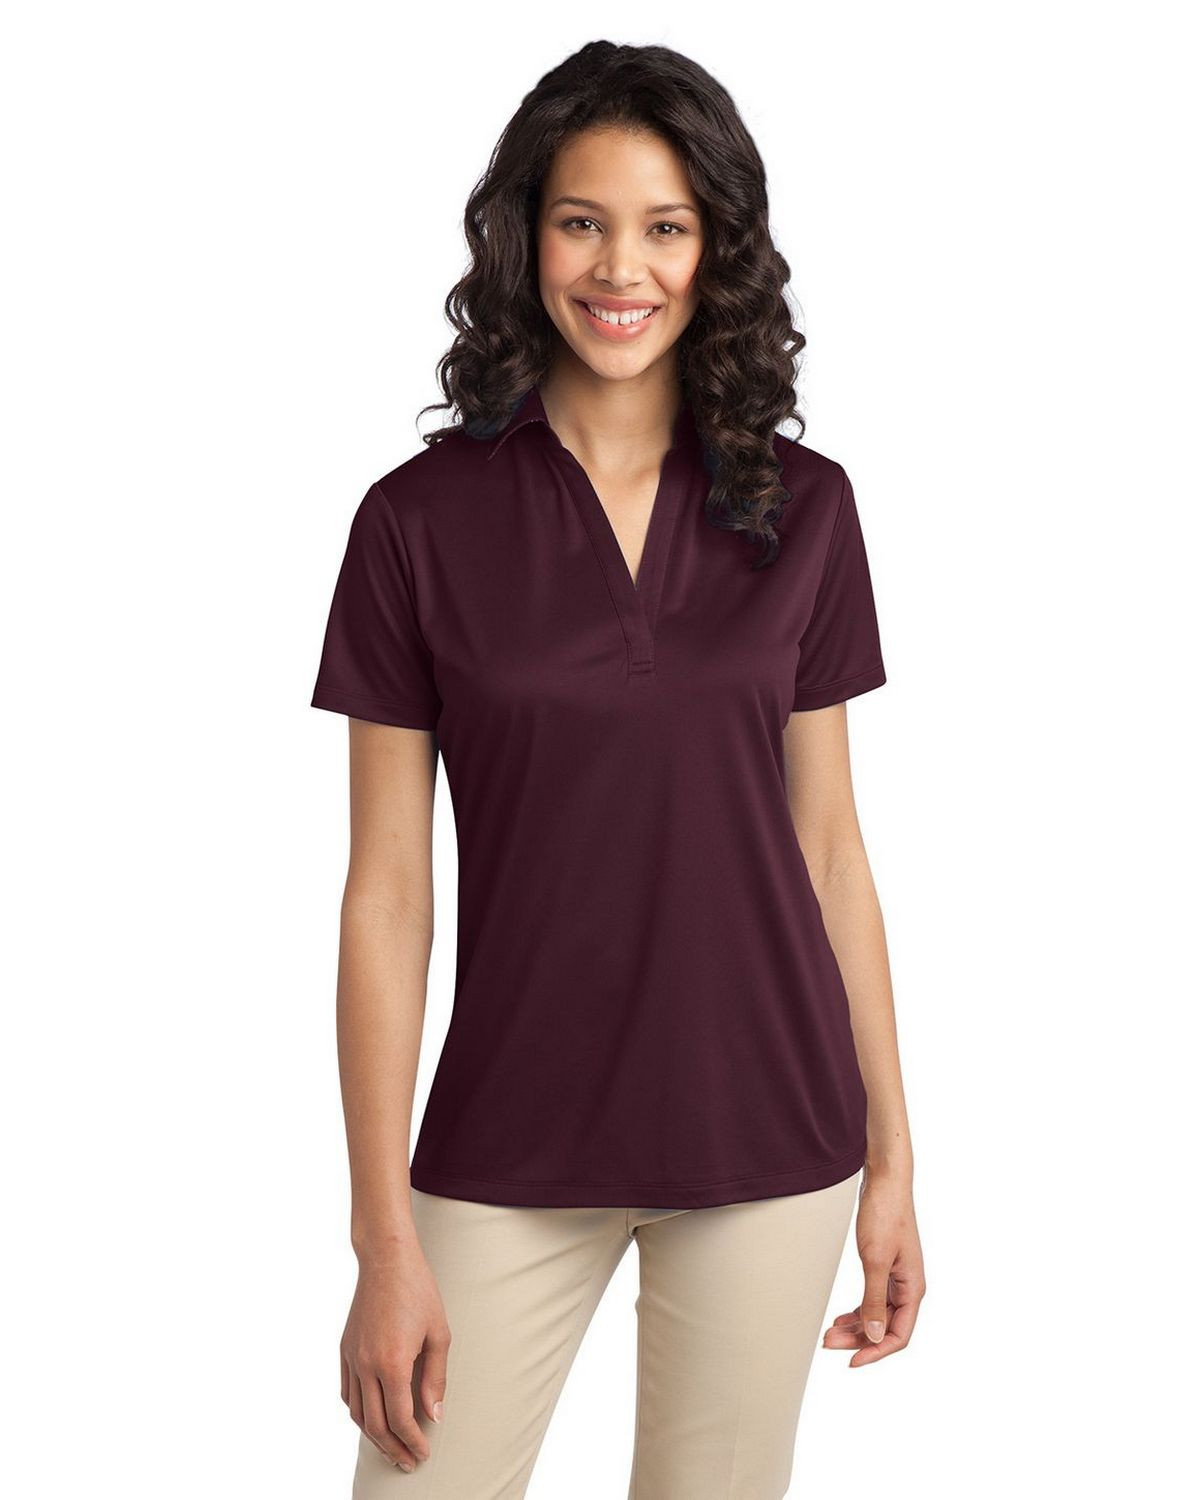 Port Authority L540 Women's Silk Touch Performance Polo - Maroon - XS #silk